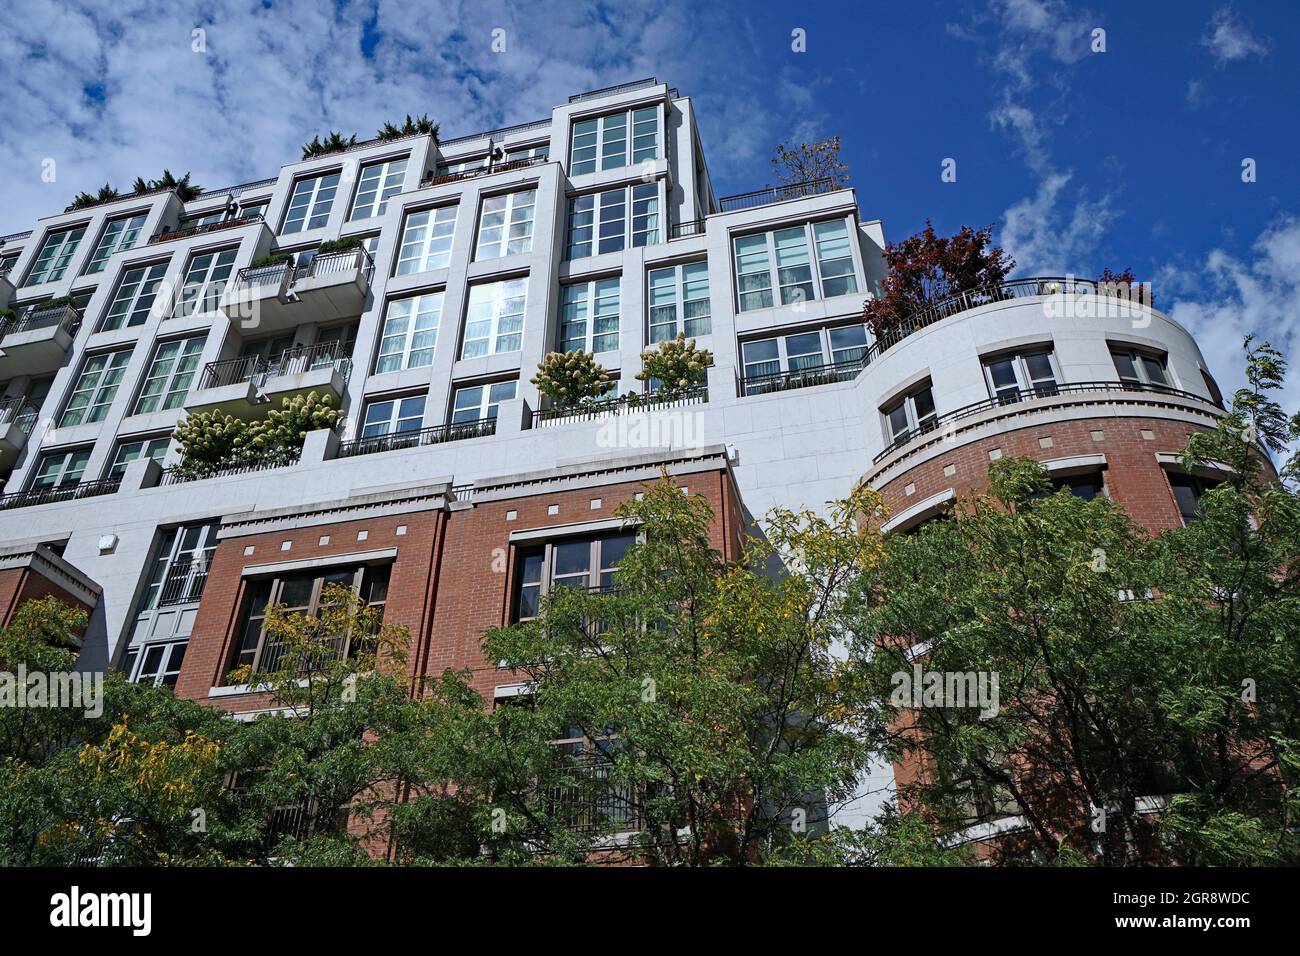 apartment building surrounded by trees, with plants on balconies and roof, which is good for the environment Stock Photo